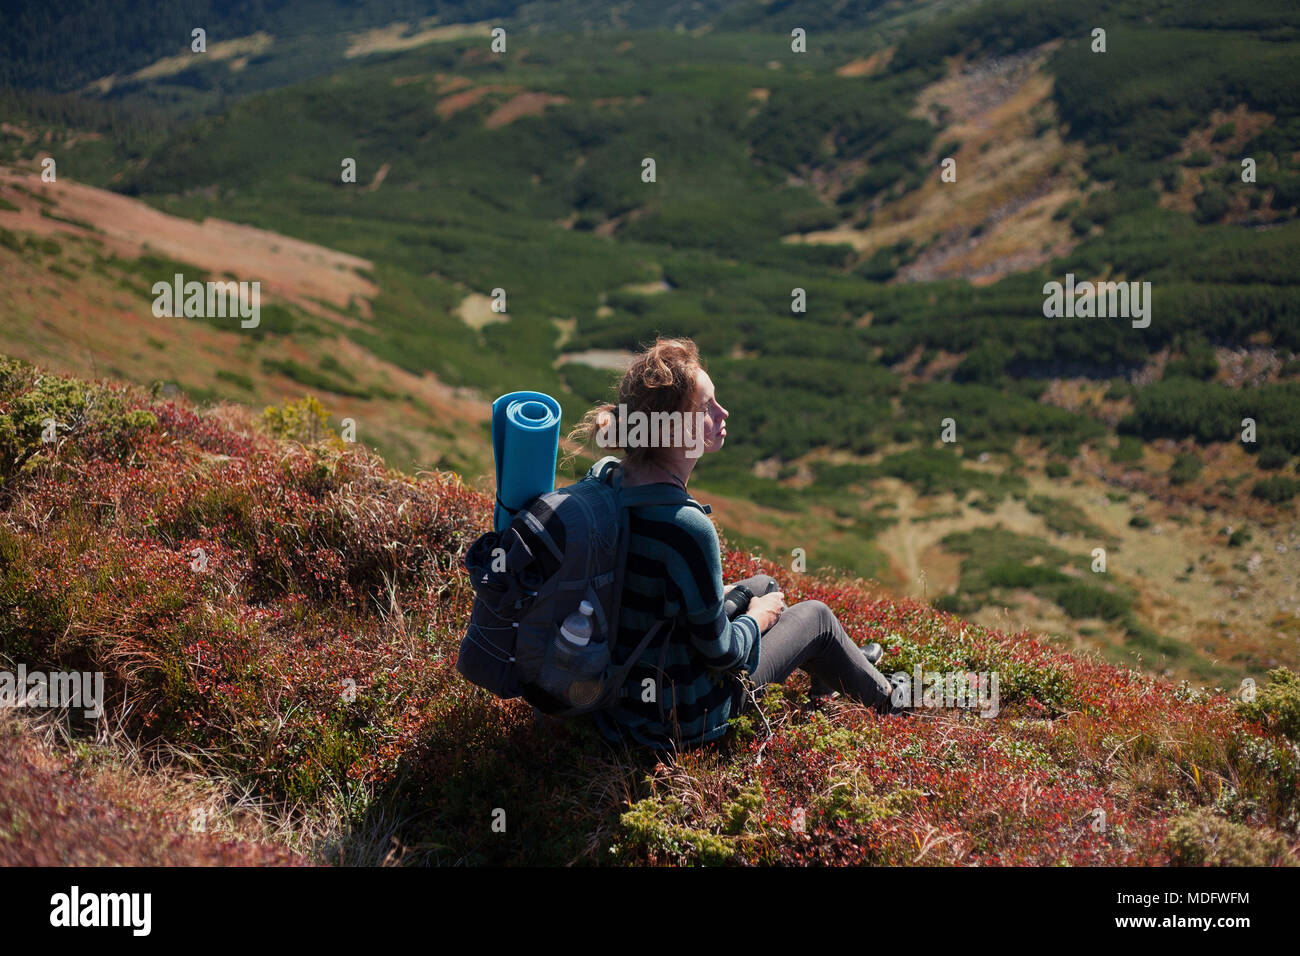 Woman sitting on mountain slope looking at view, Ukraine Stock Photo